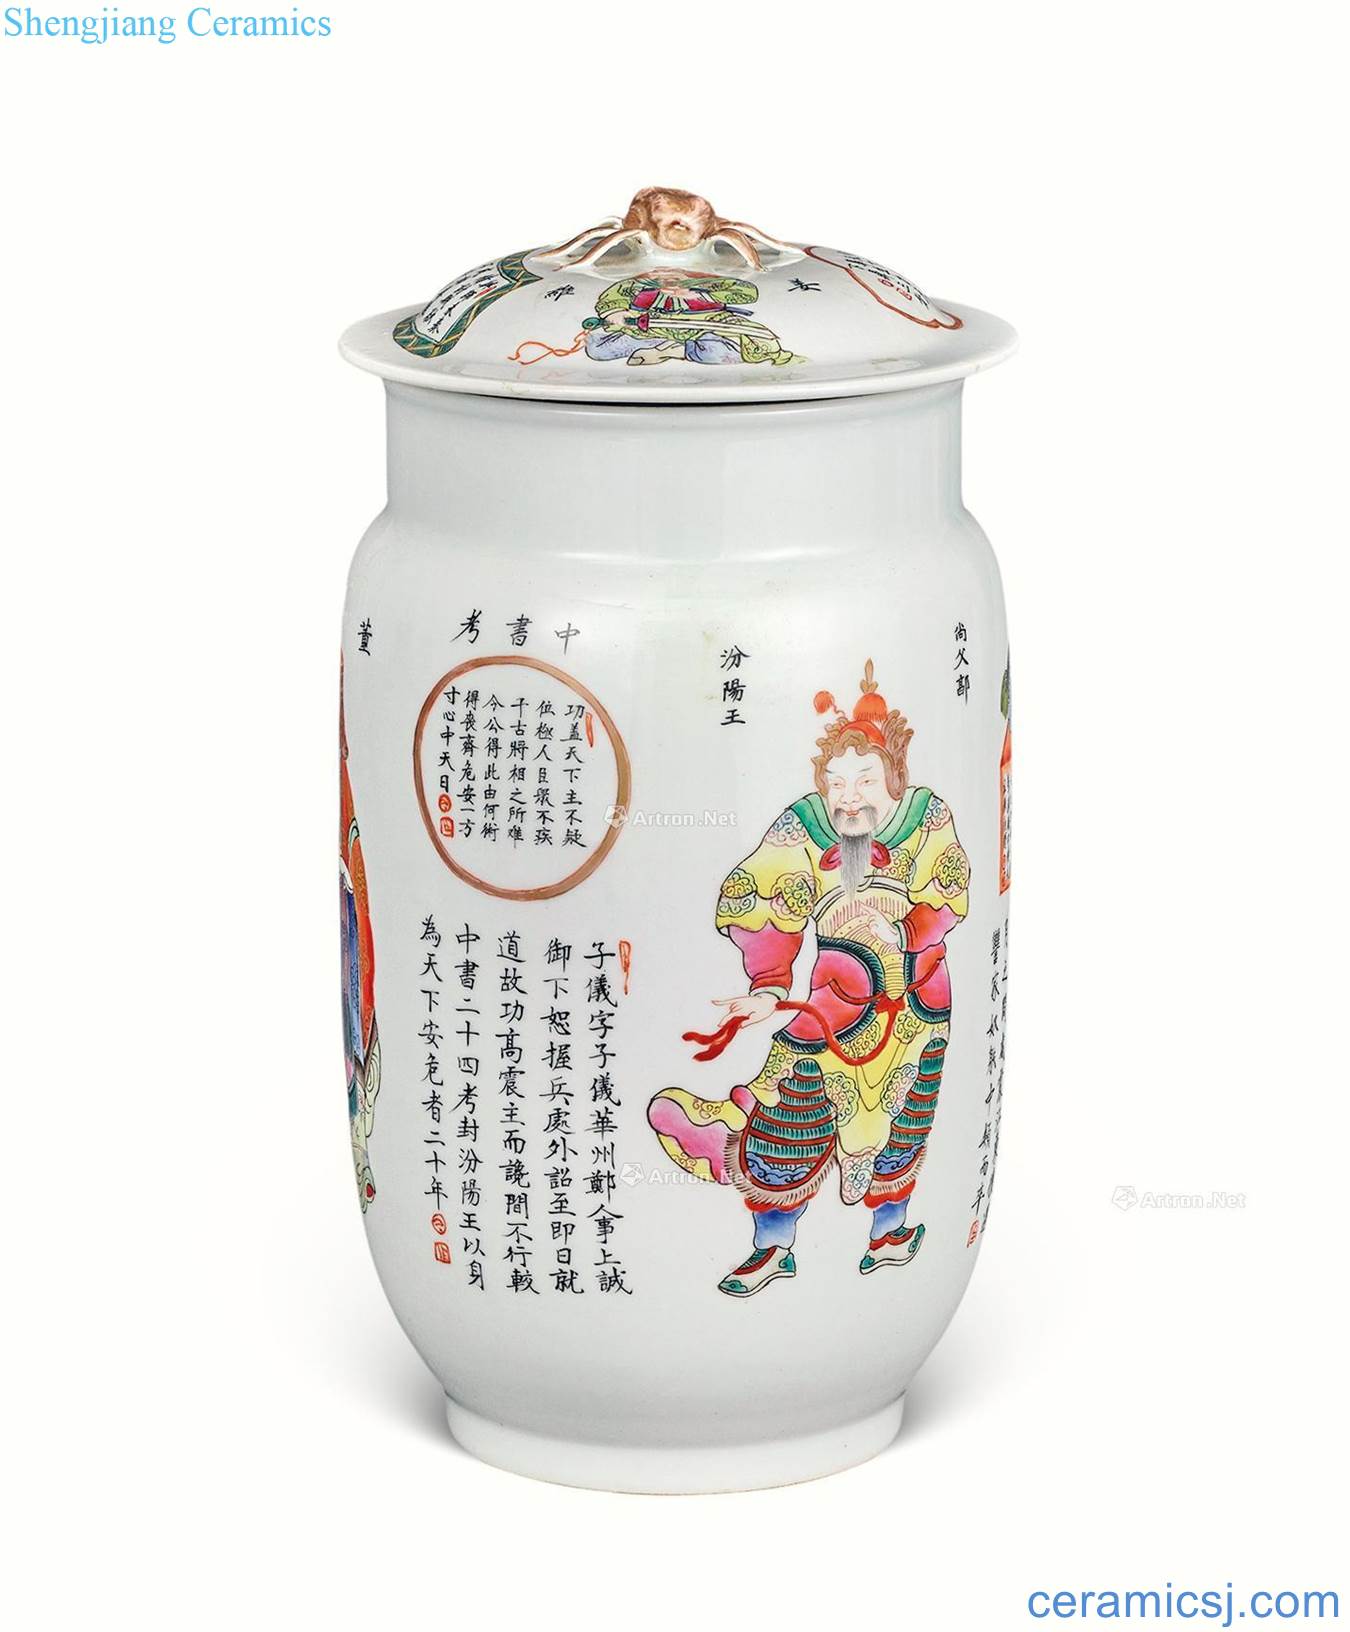 Cover pot pastel one like spectrum in the qing dynasty